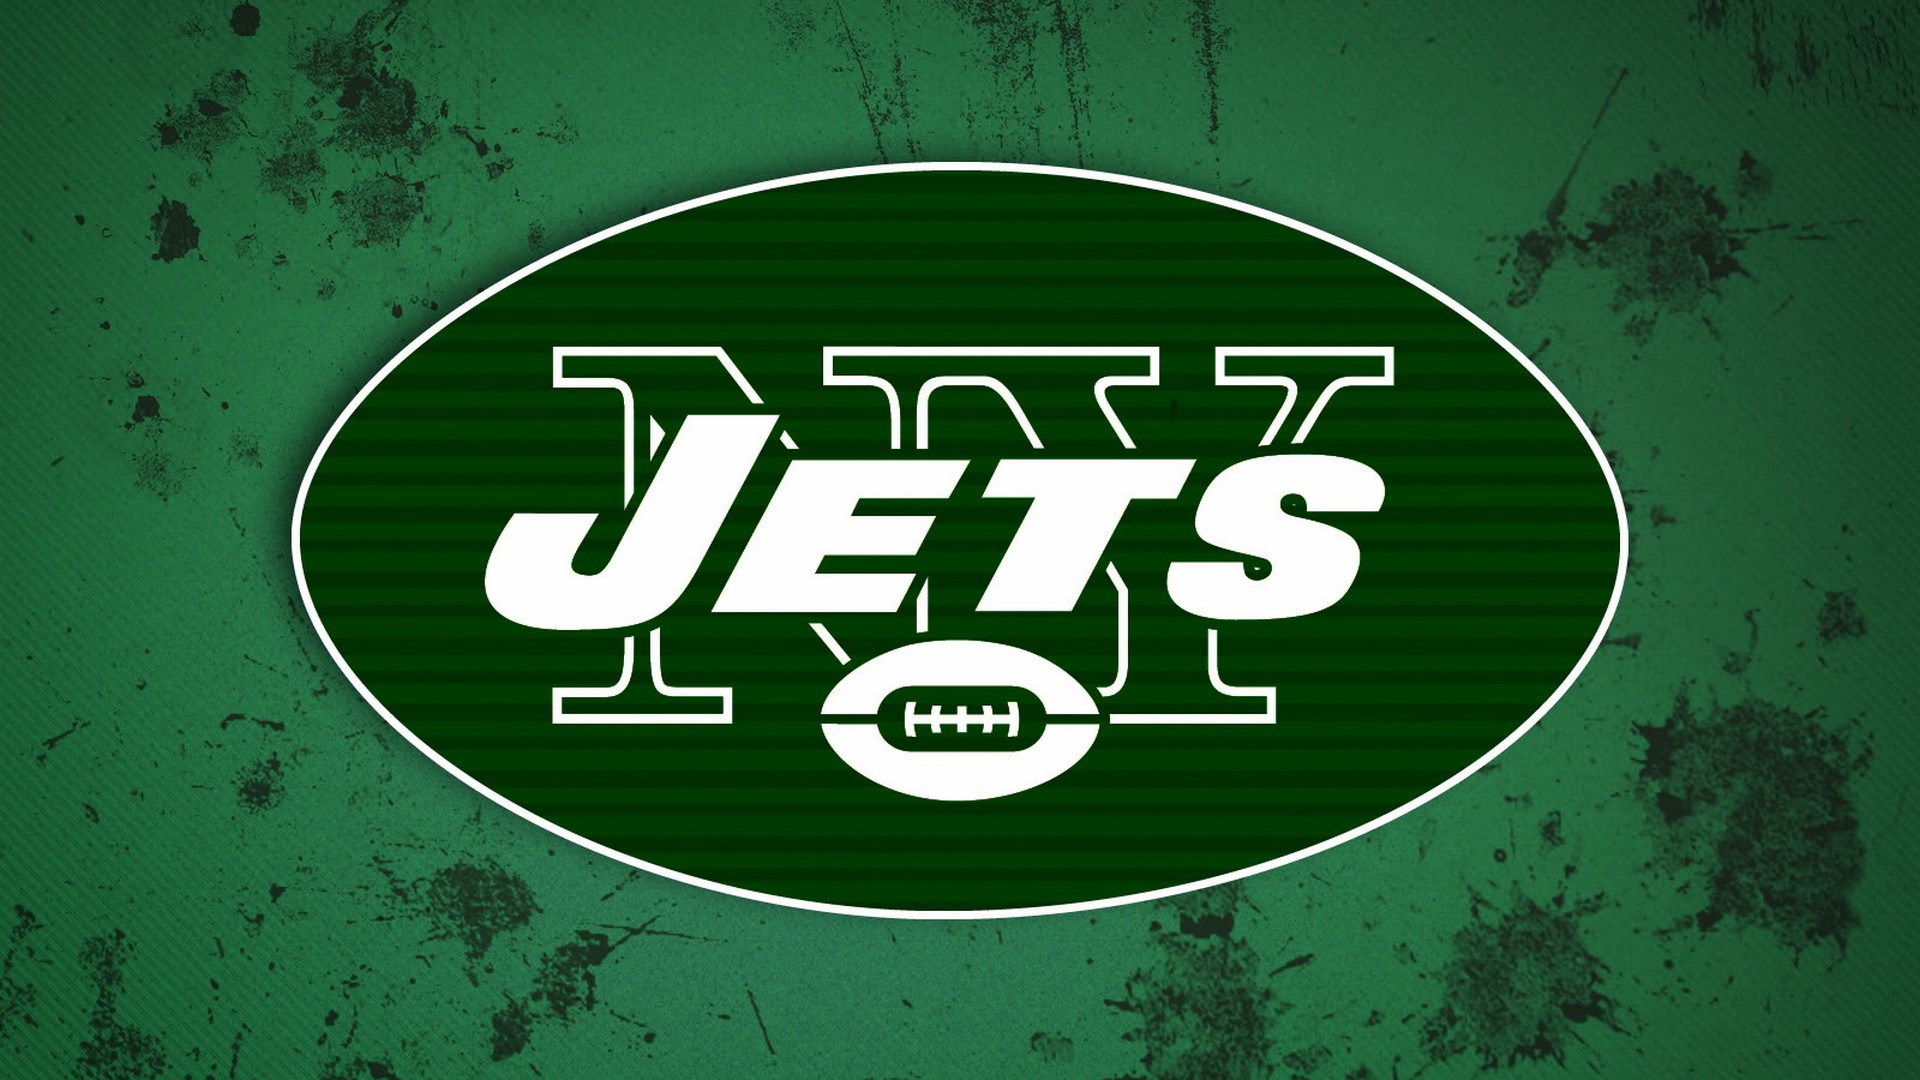 New York Jets Wallpaper With Resolution 1920X1080 pixel. You can make this wallpaper for your Mac or Windows Desktop Background, iPhone, Android or Tablet and another Smartphone device for free